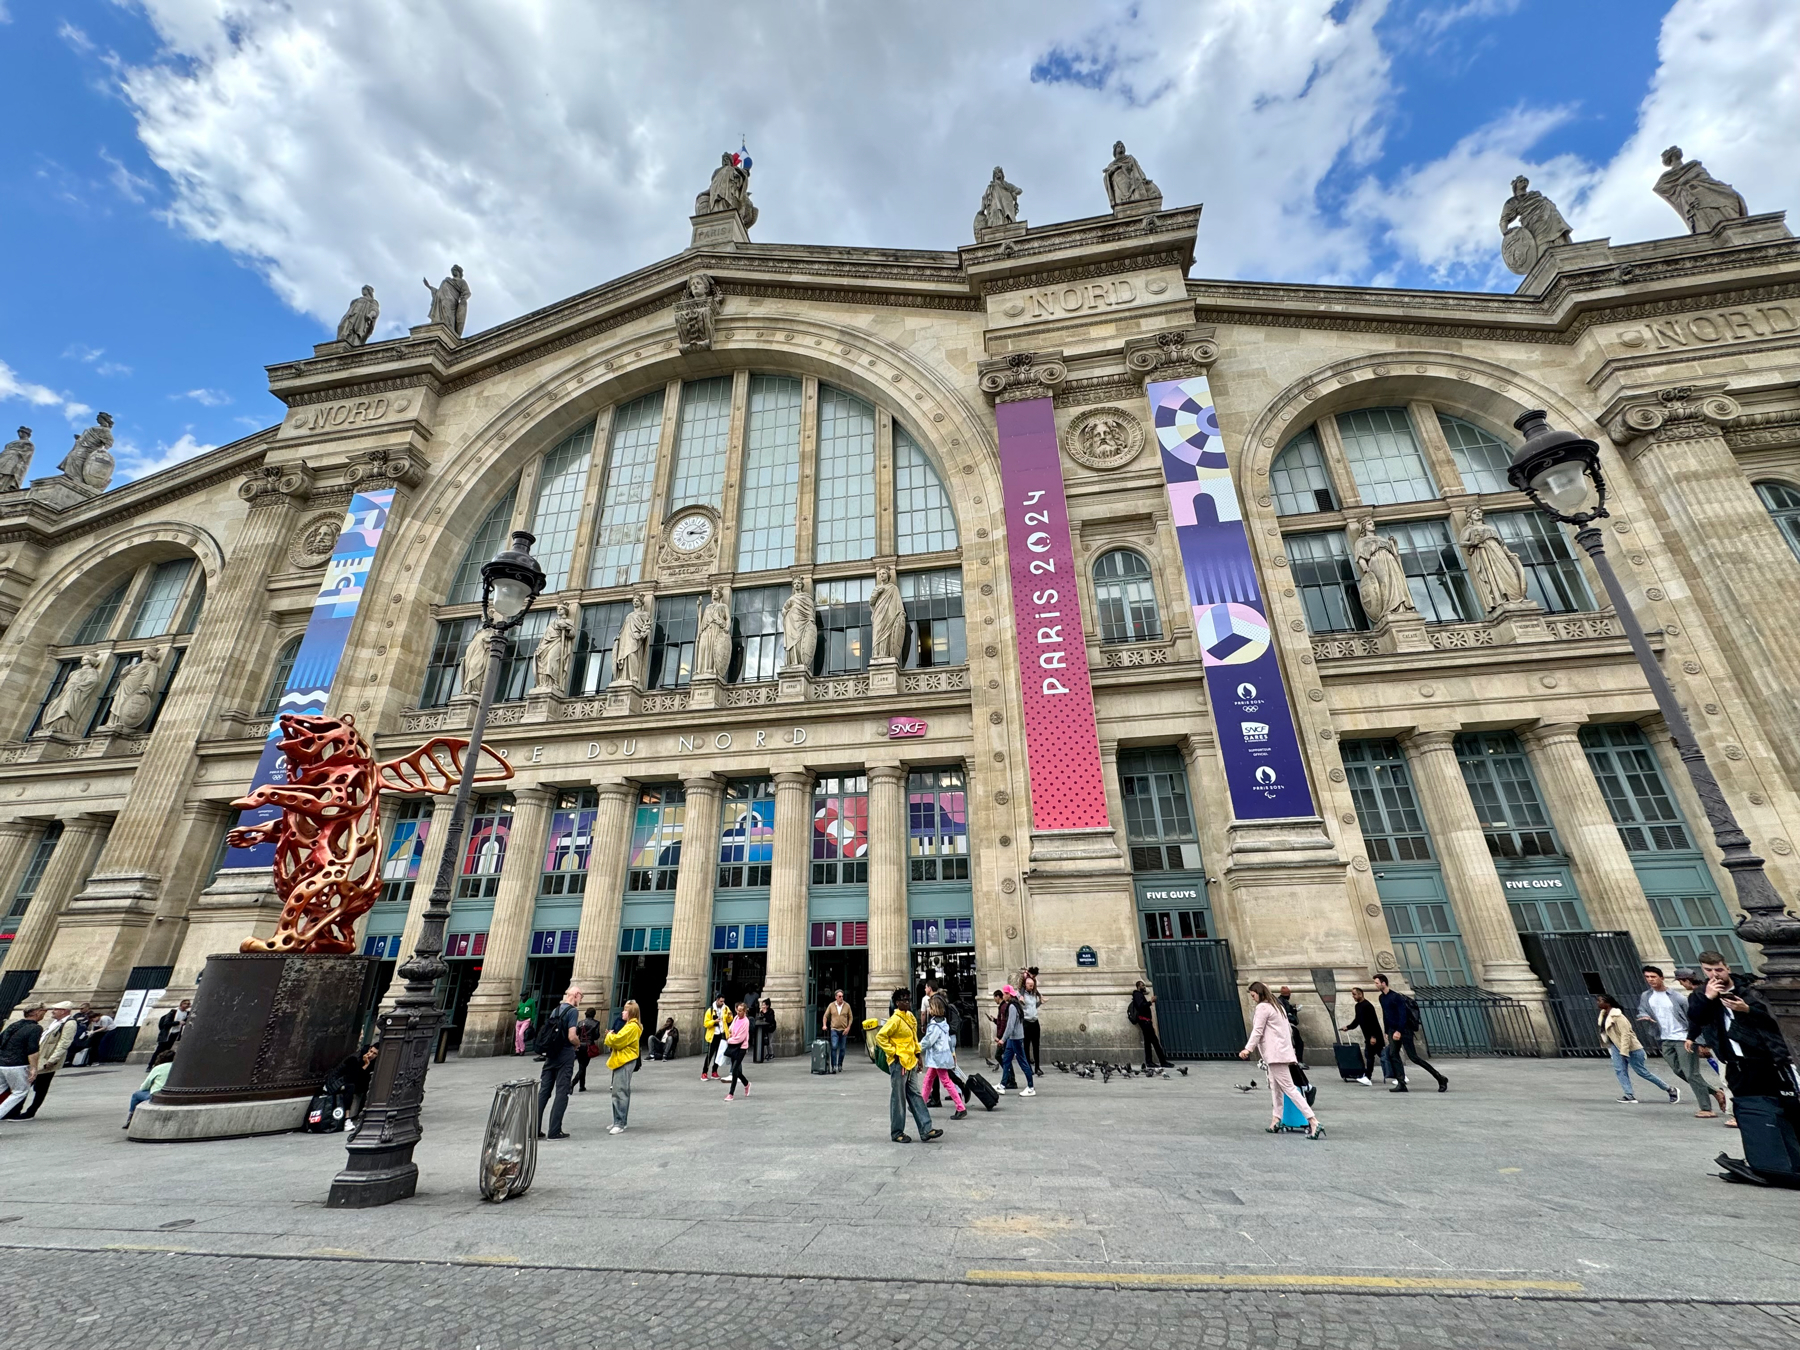 A wide shot of the Gare du Nord train station in Paris with pedestrians walking in front, decorative banners, and a red sculpture near a lamppost.